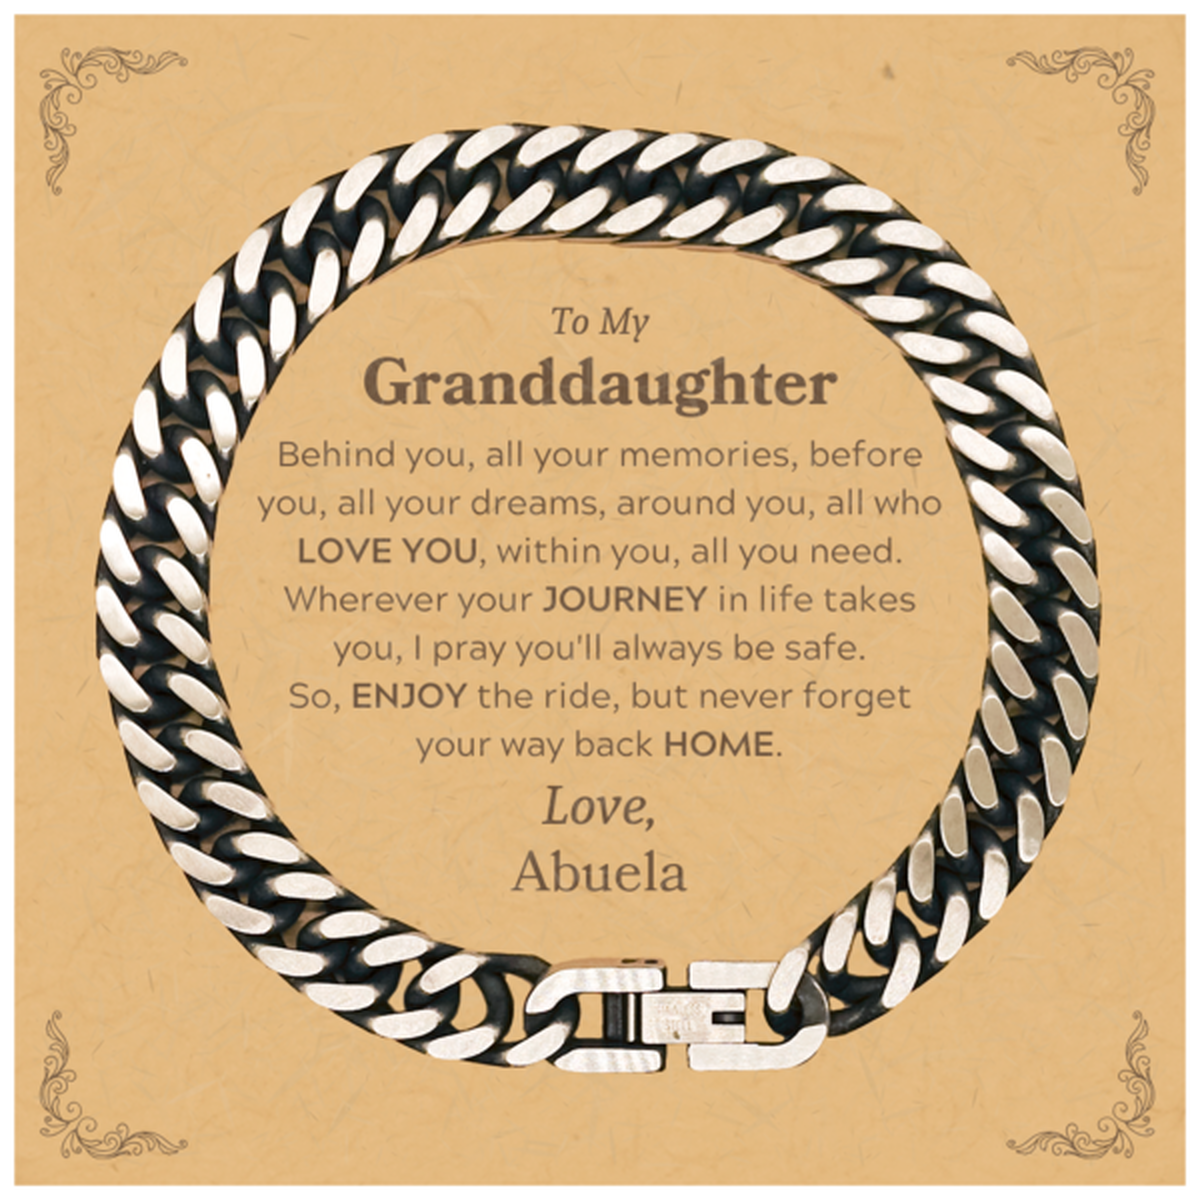 To My Granddaughter Graduation Gifts from Abuela, Granddaughter Cuban Link Chain Bracelet Christmas Birthday Gifts for Granddaughter Behind you, all your memories, before you, all your dreams. Love, Abuela